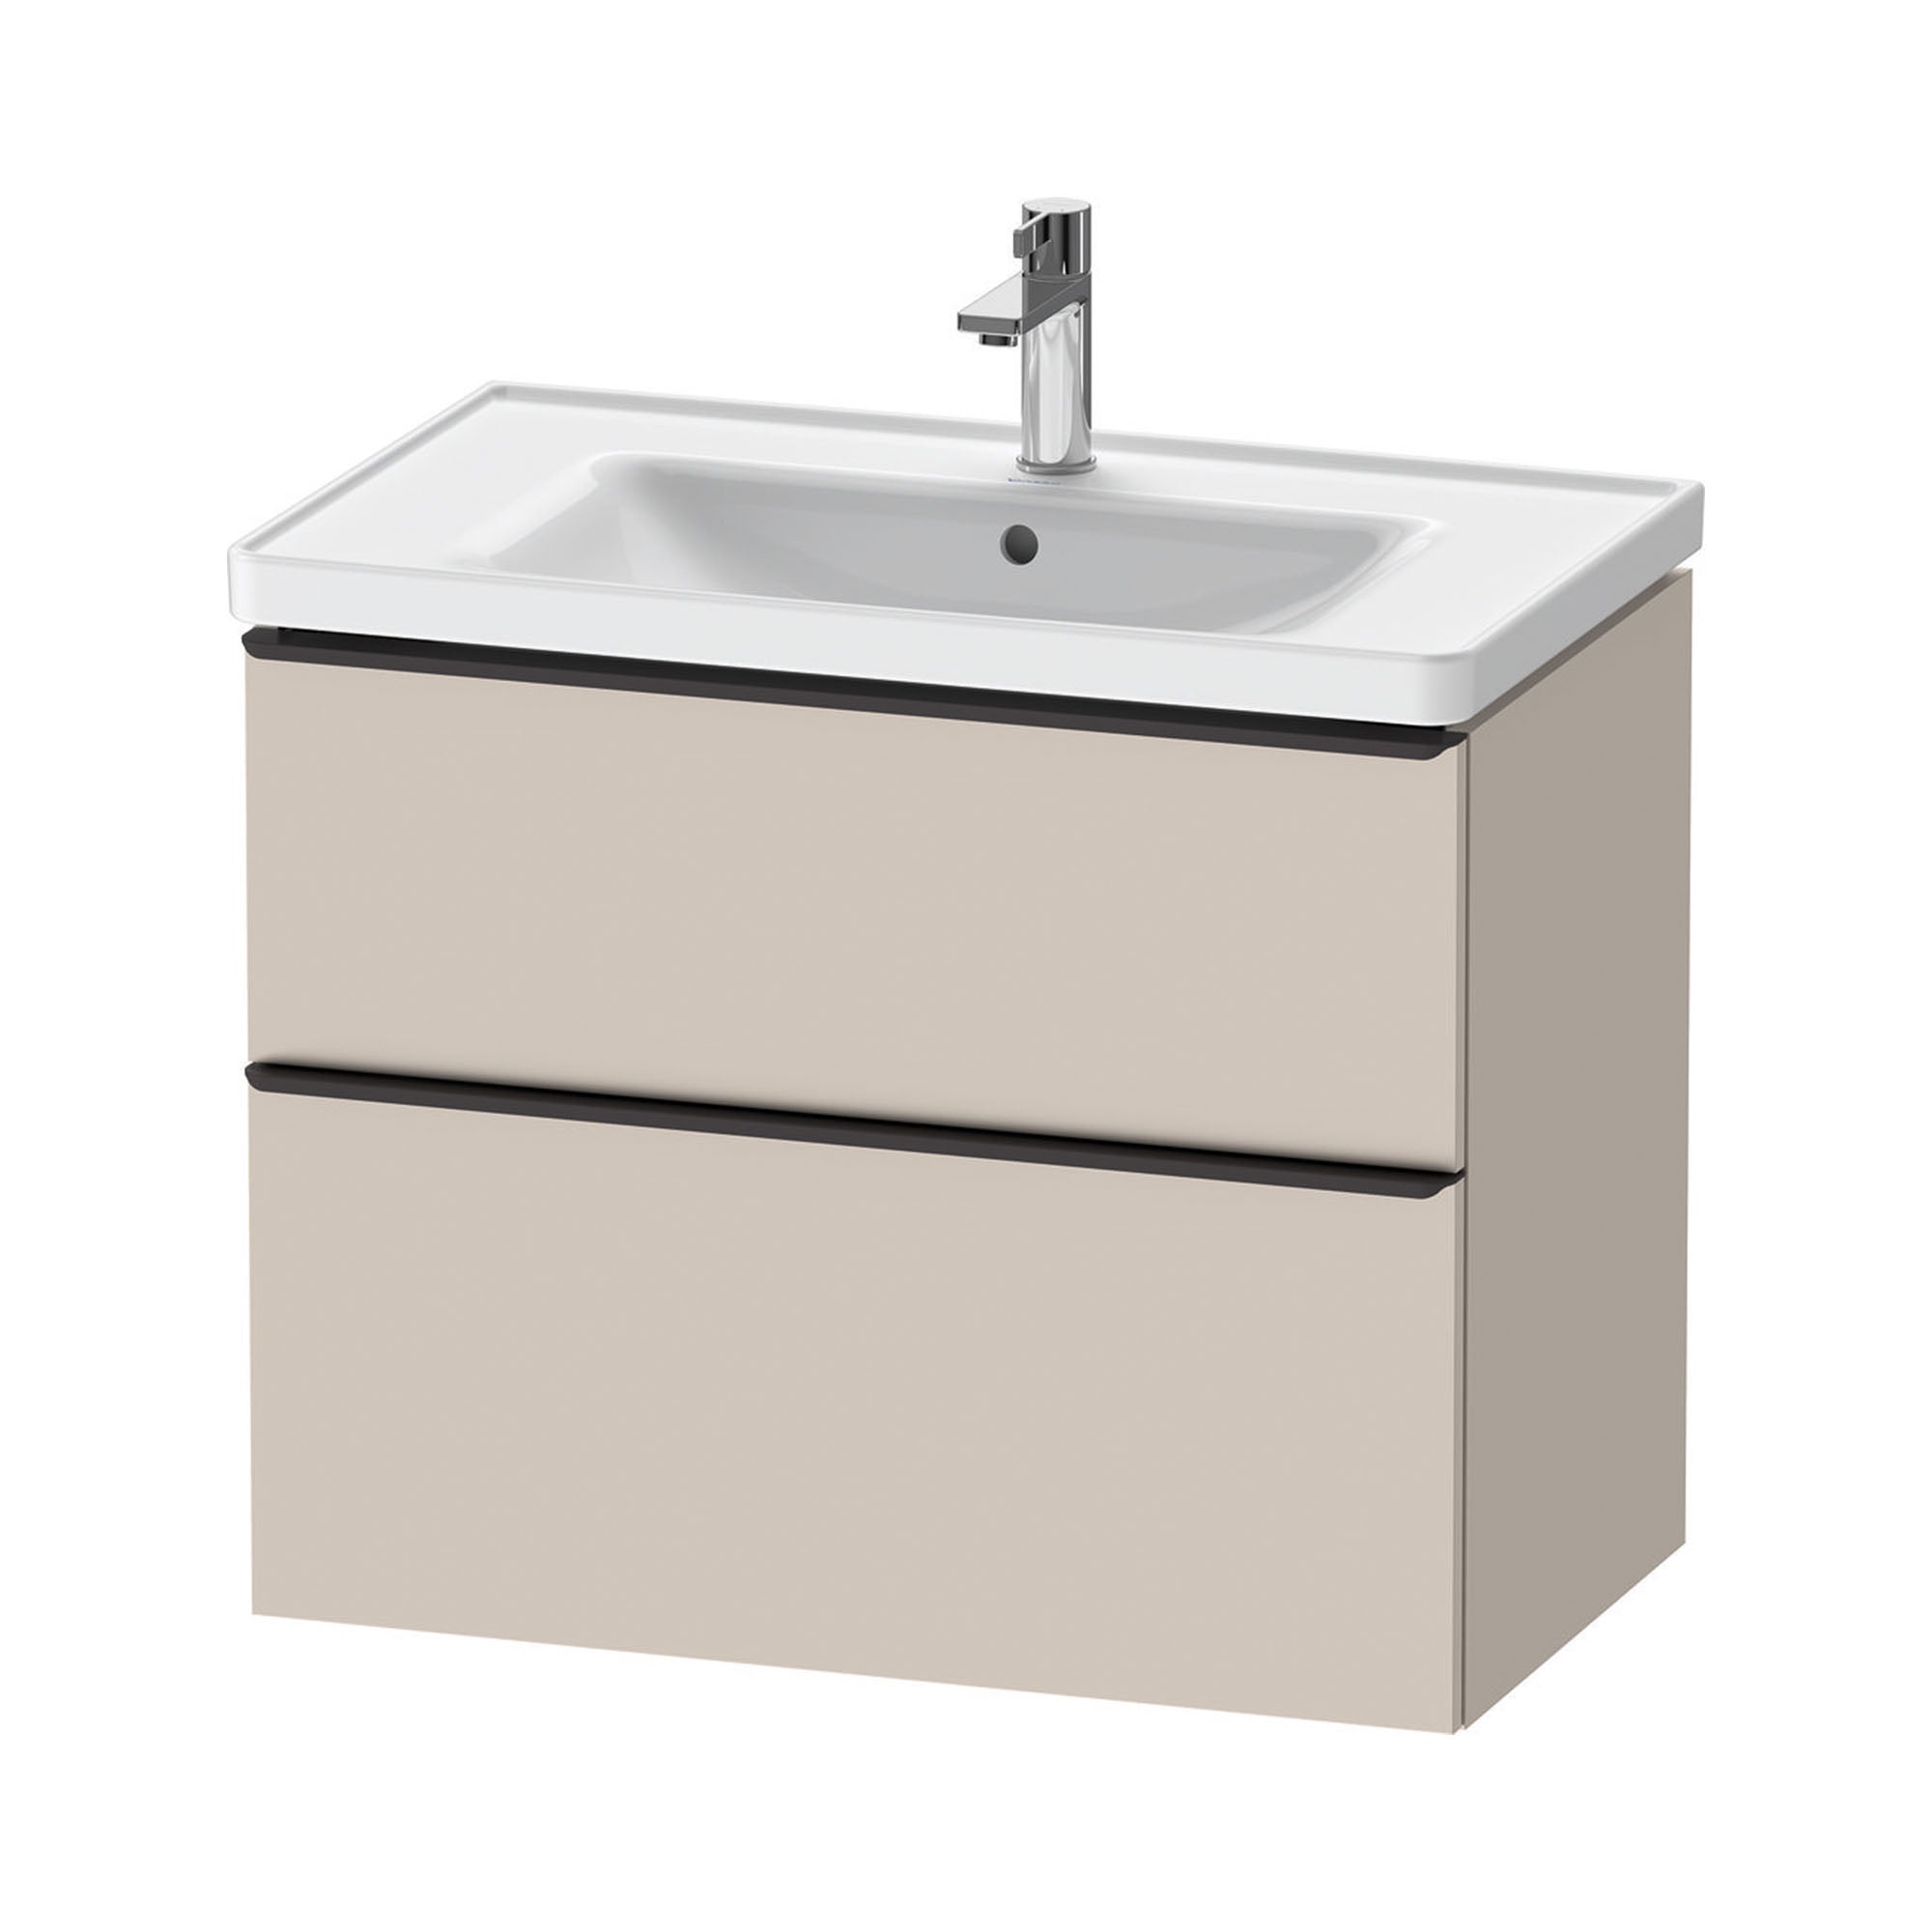 duravit d-neo 800mm wall mounted vanity unit with d-neo basin taupe diamond black handles